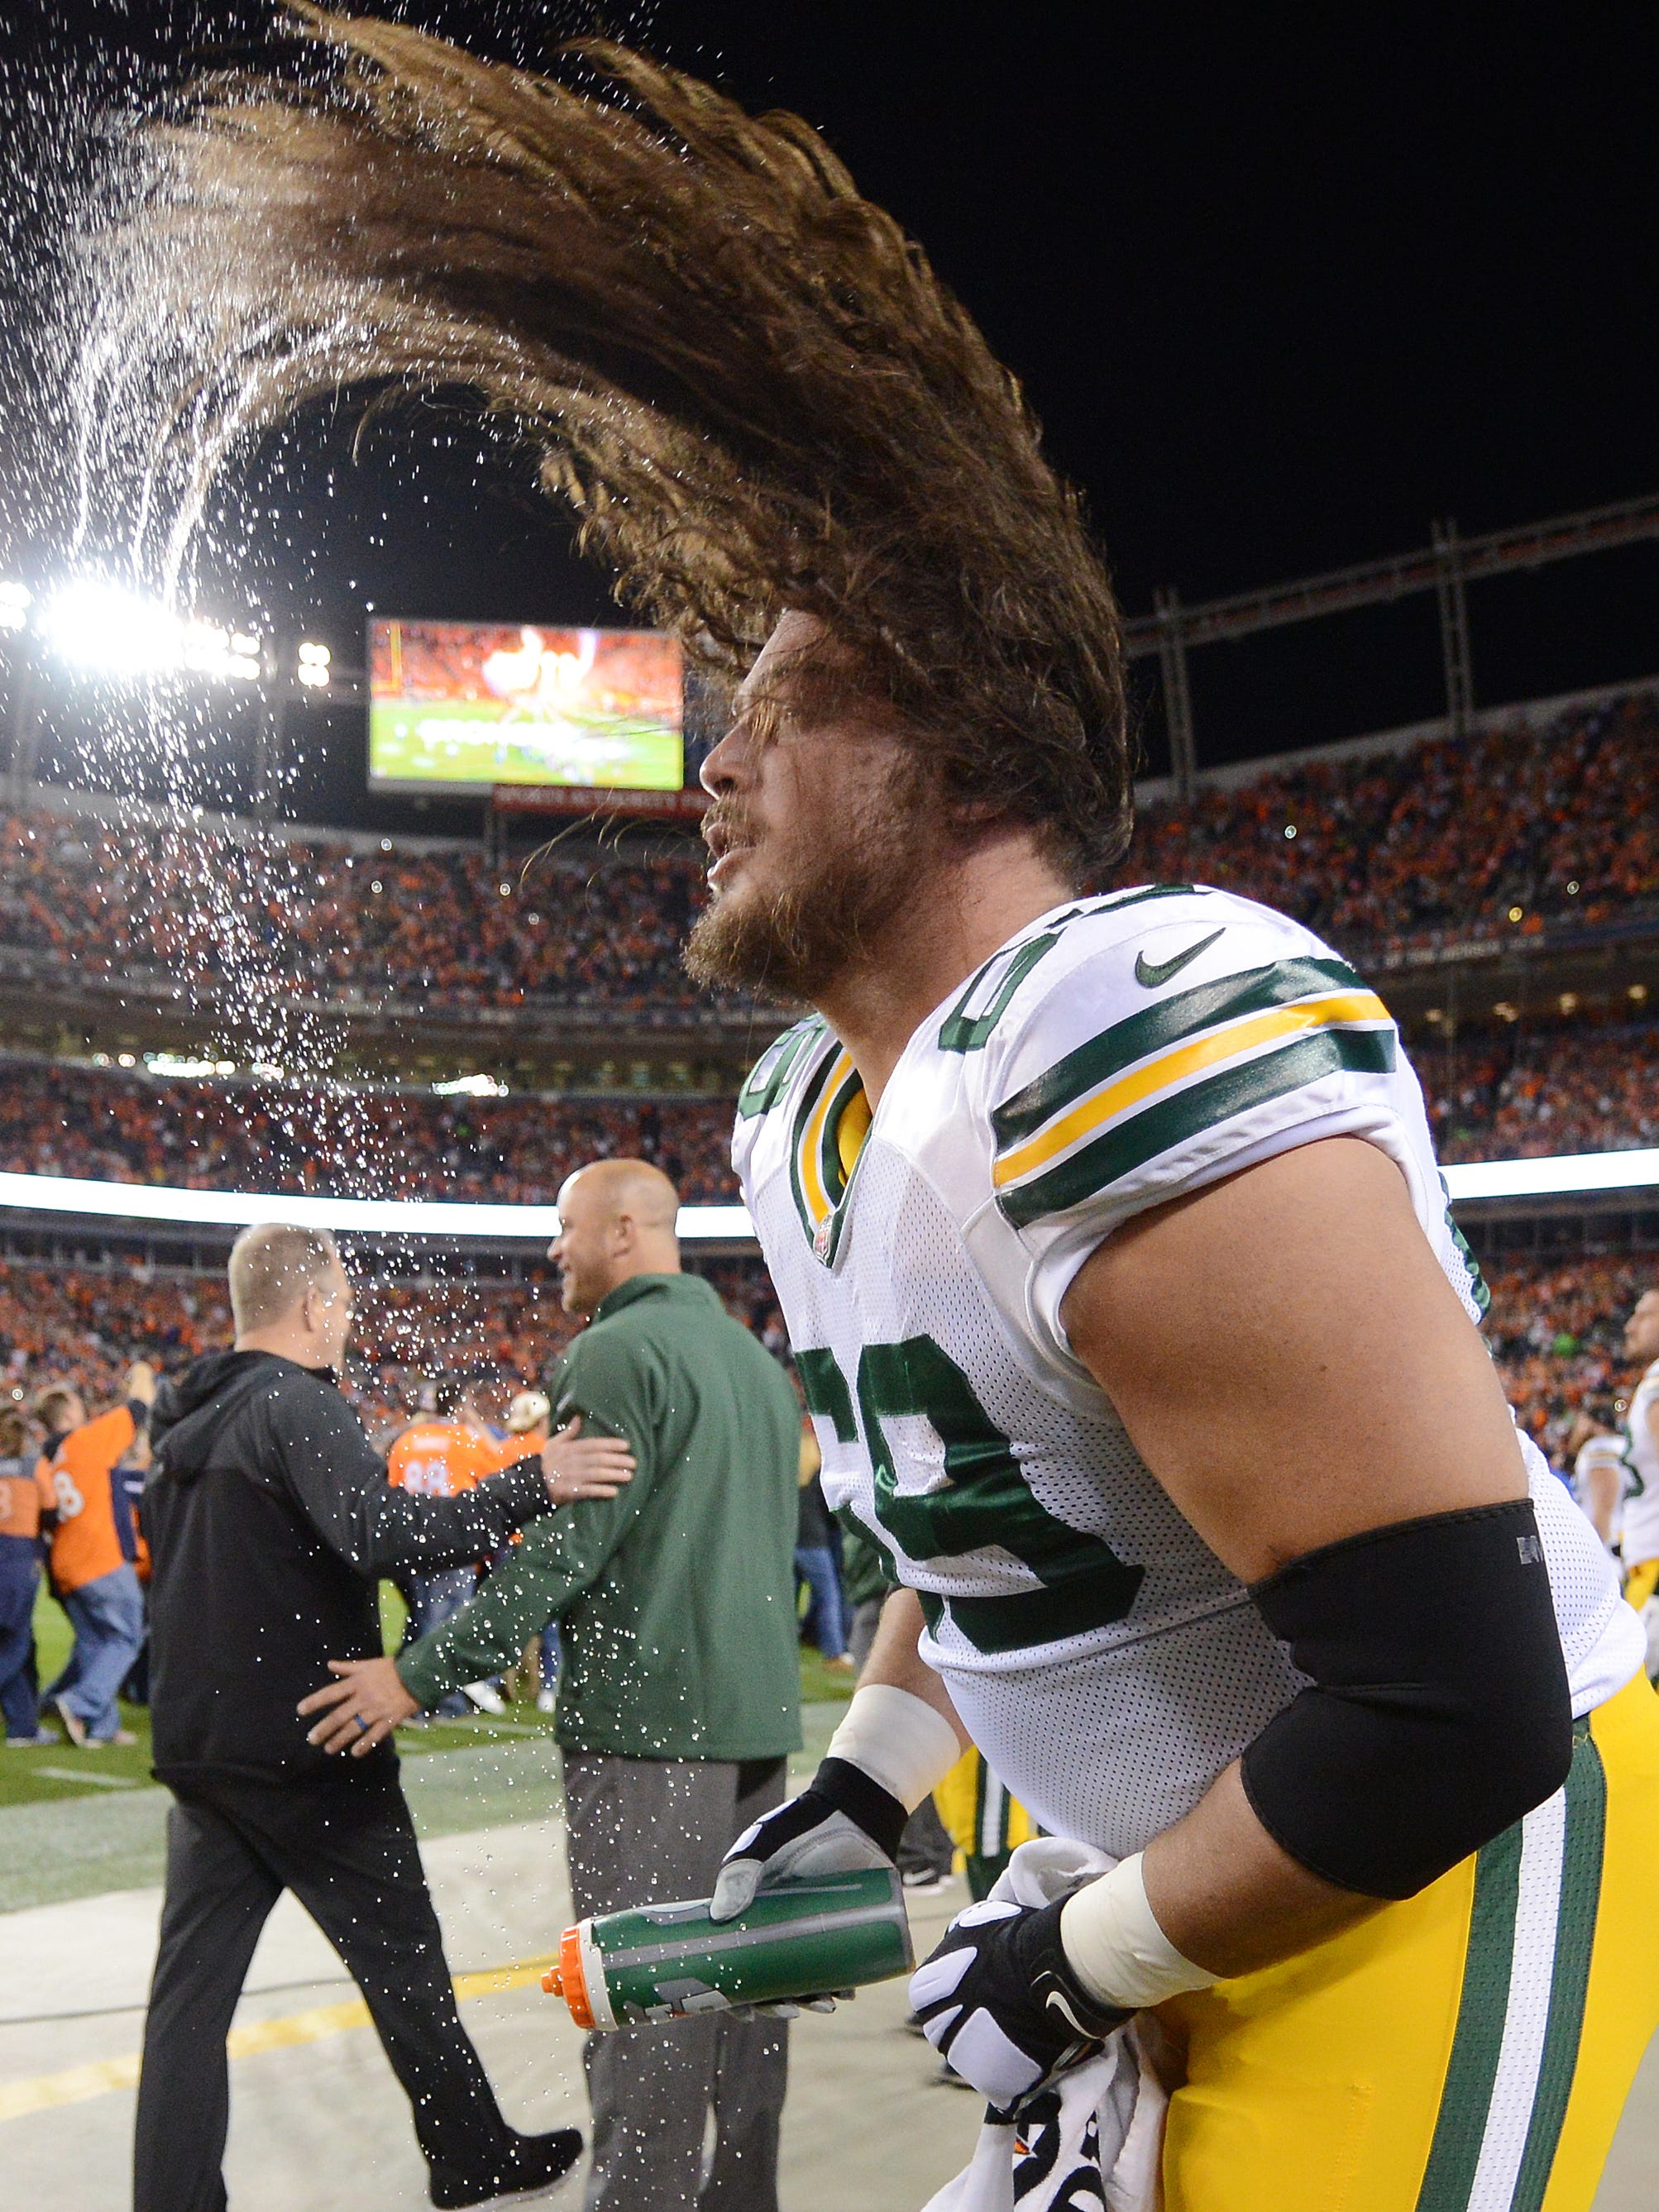 Green Bay Packers tackle David Bakhtiari (69) does a wet hair flip before the game against the Denver Broncos on Nov. 1, 2015, at Sports Authority Field in Denver.